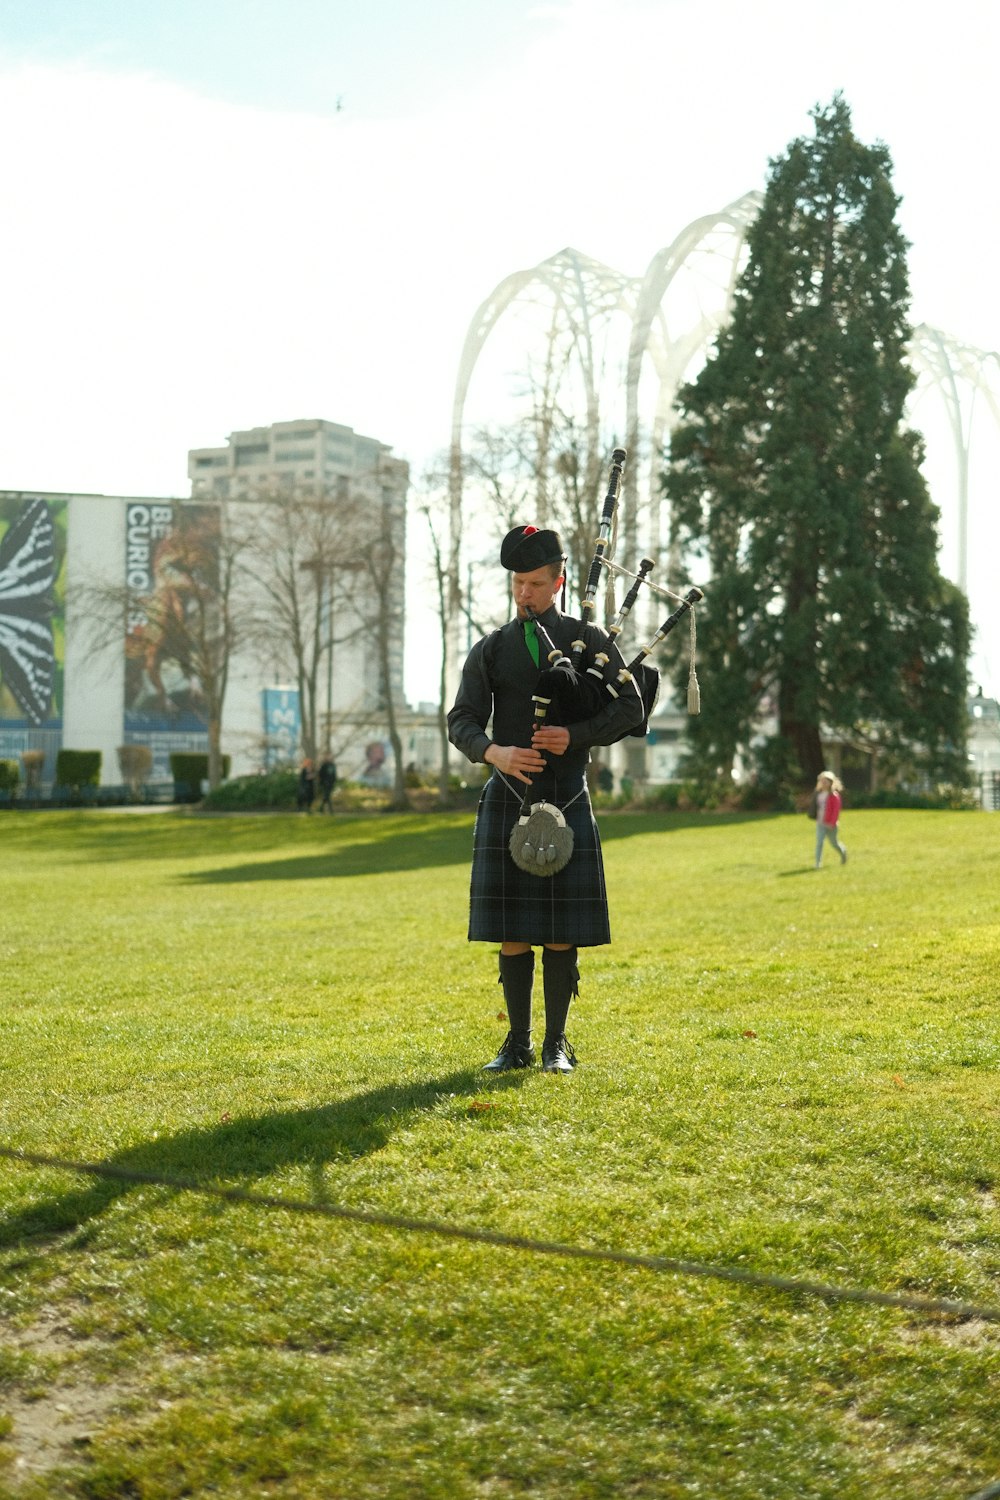 a man in a kilt playing bagpipes in a park